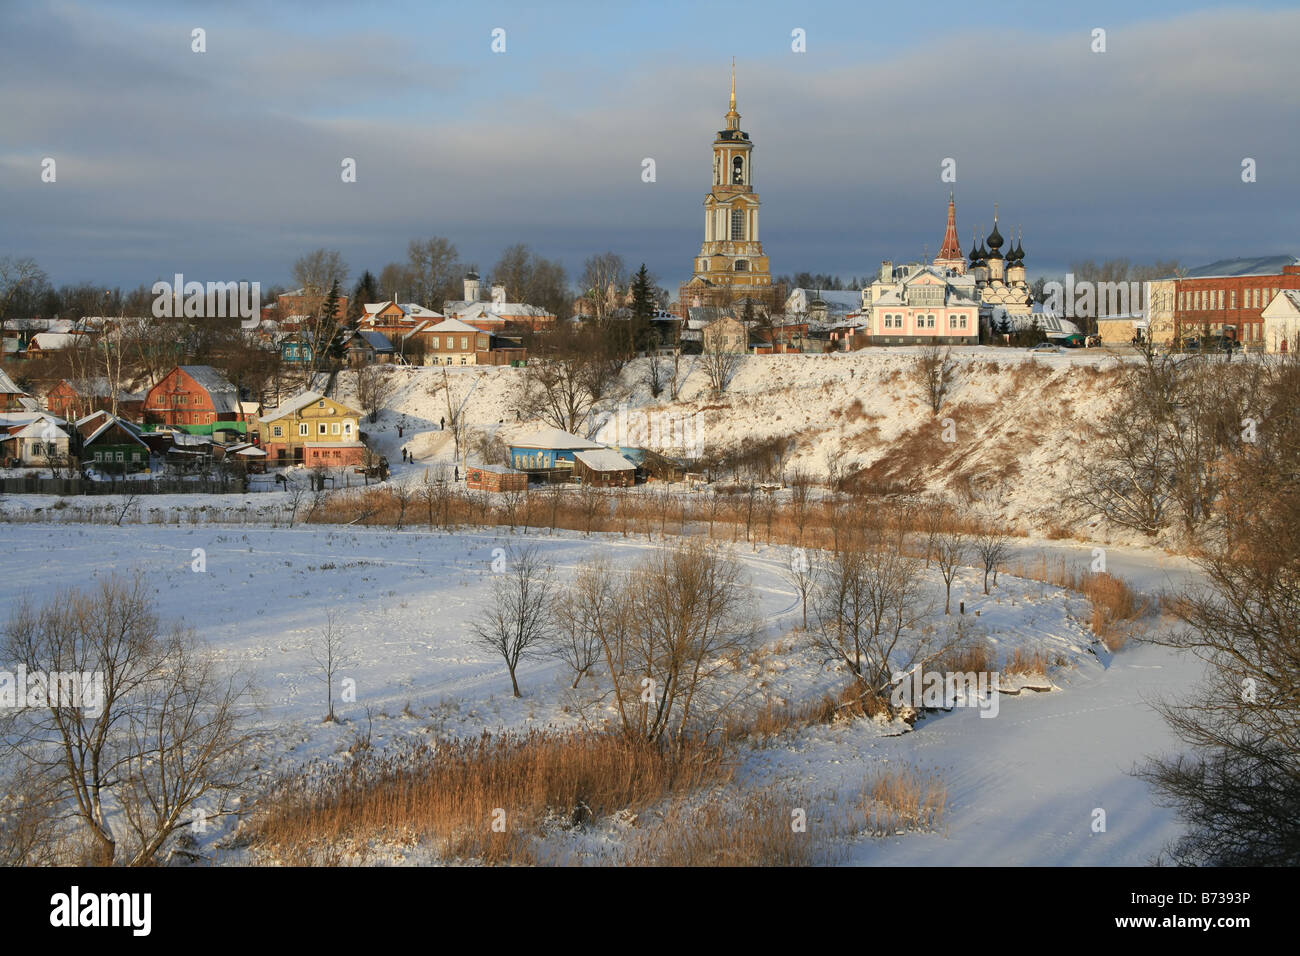 Background with Suzdal architecture. Suzdal is a old town in Russia, situated north-east of Moscow Stock Photo